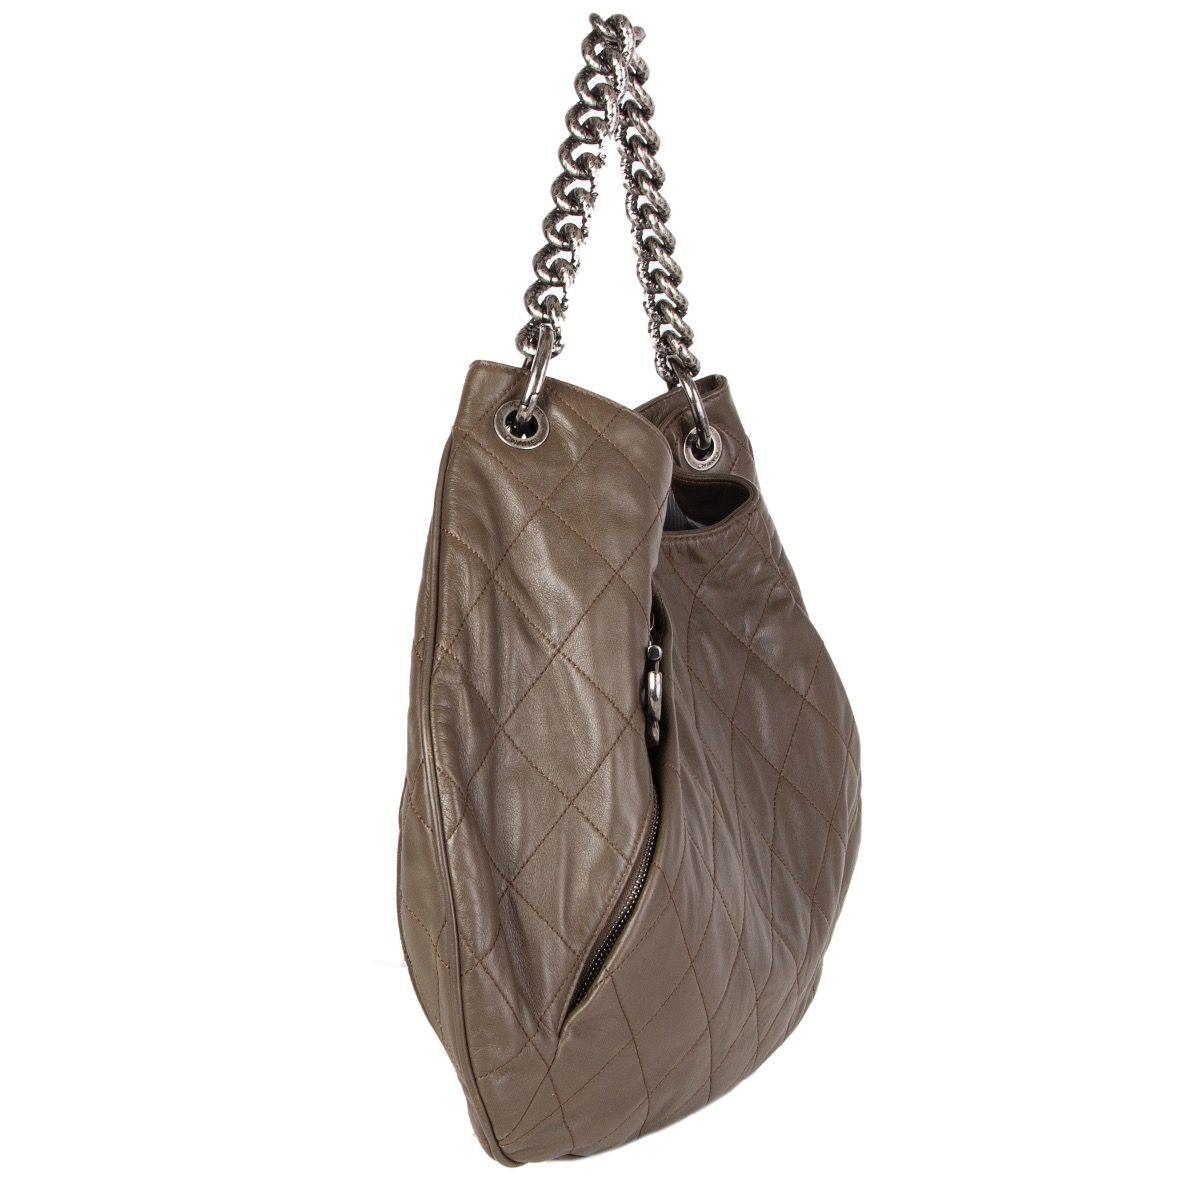 Chanel 'Coco Pleats Large' hobo in olive green quilted leather with chunky antique silver-tone chain. Zipper pocket on the front pleat. Closes with a magnetic-snap on top. Lined in light gray grosgrain fabric with two open pockets against the front